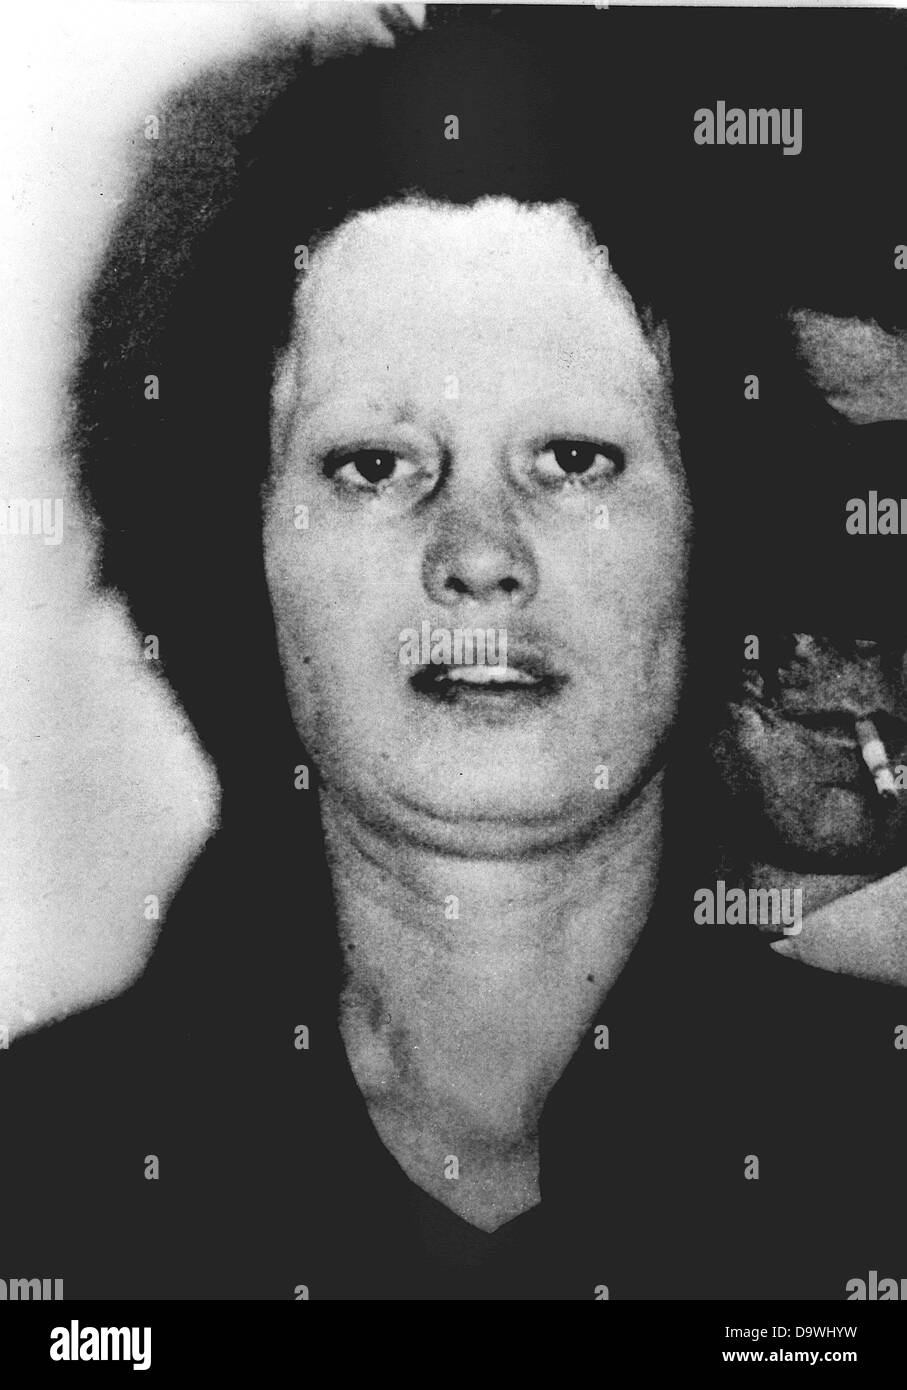 Police photograph of presumed RAF terrorist Ulrike Meinhof, who was arrested in Hannover shortly before. Photographed on the 18th of June in 1972. Stock Photo